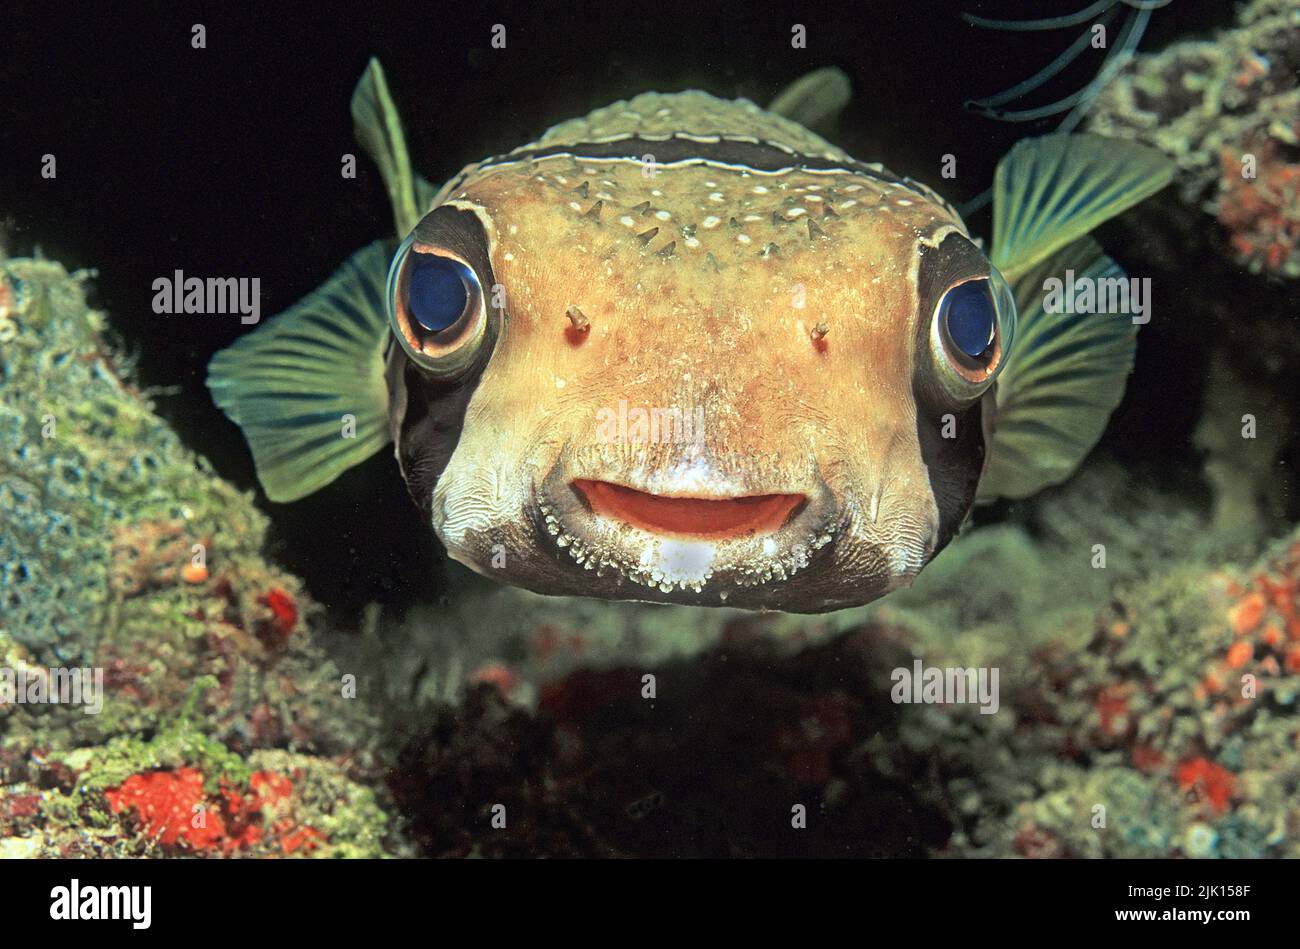 Black-blotched porcupinefish, (Diodon liturosus), by inflating the body, the spines are erected, Ari Atoll, Maldives, Asia Stock Photo